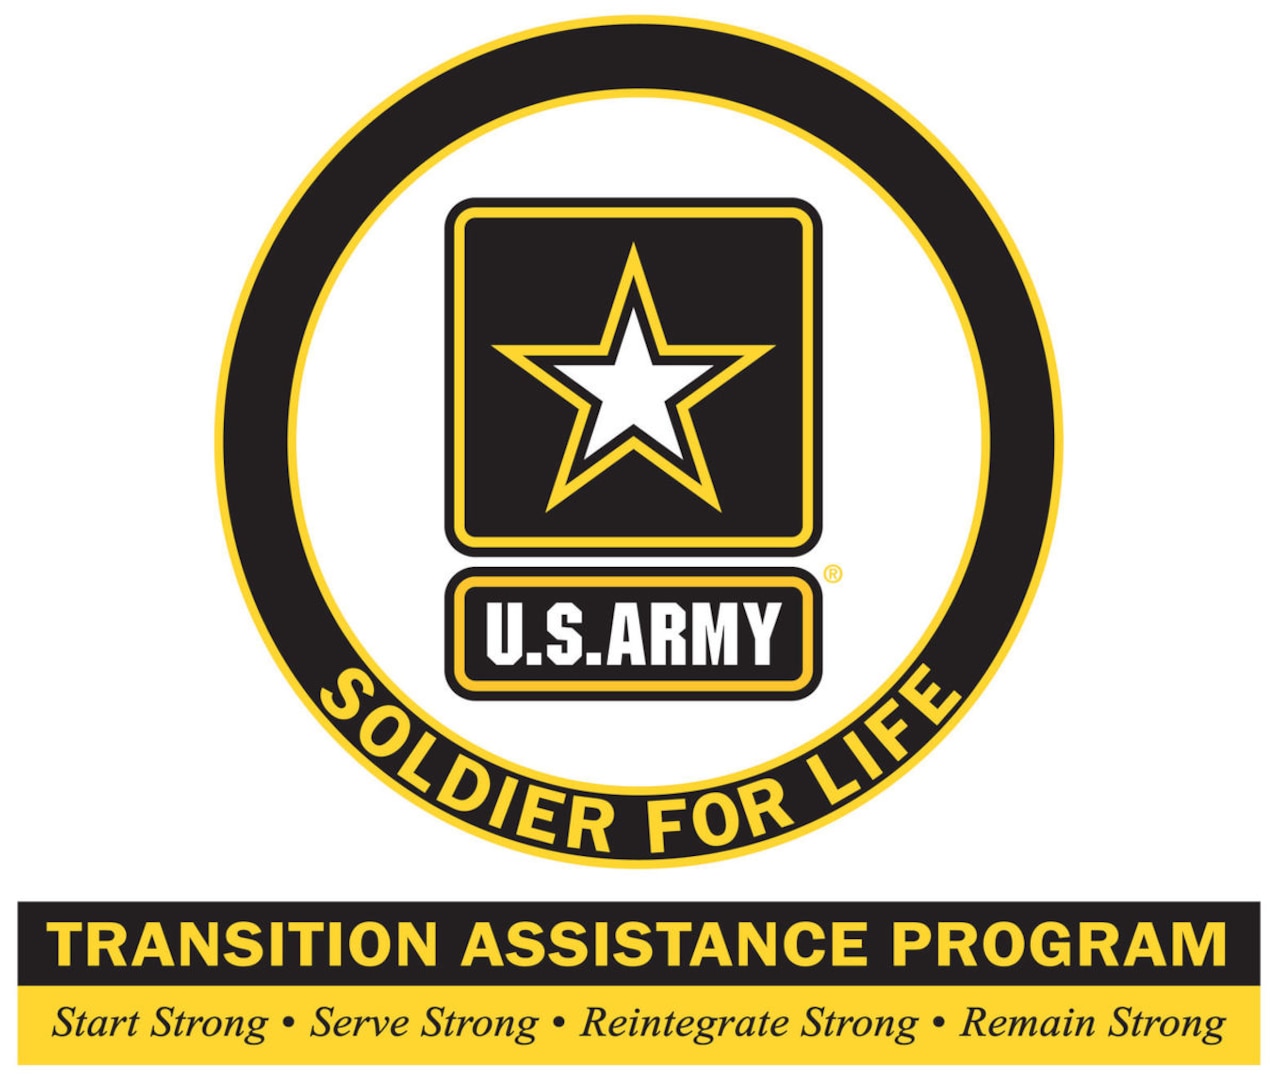 In the last four years, the Army has saved over $900 million in cost avoidance for unemployment compensation expenditures through programs like the U.S. Army Installation Management Command’s Soldier for Life Transition Assistance Program, which prepares Soldiers for finding employment in the civilian sector when they leave active service.